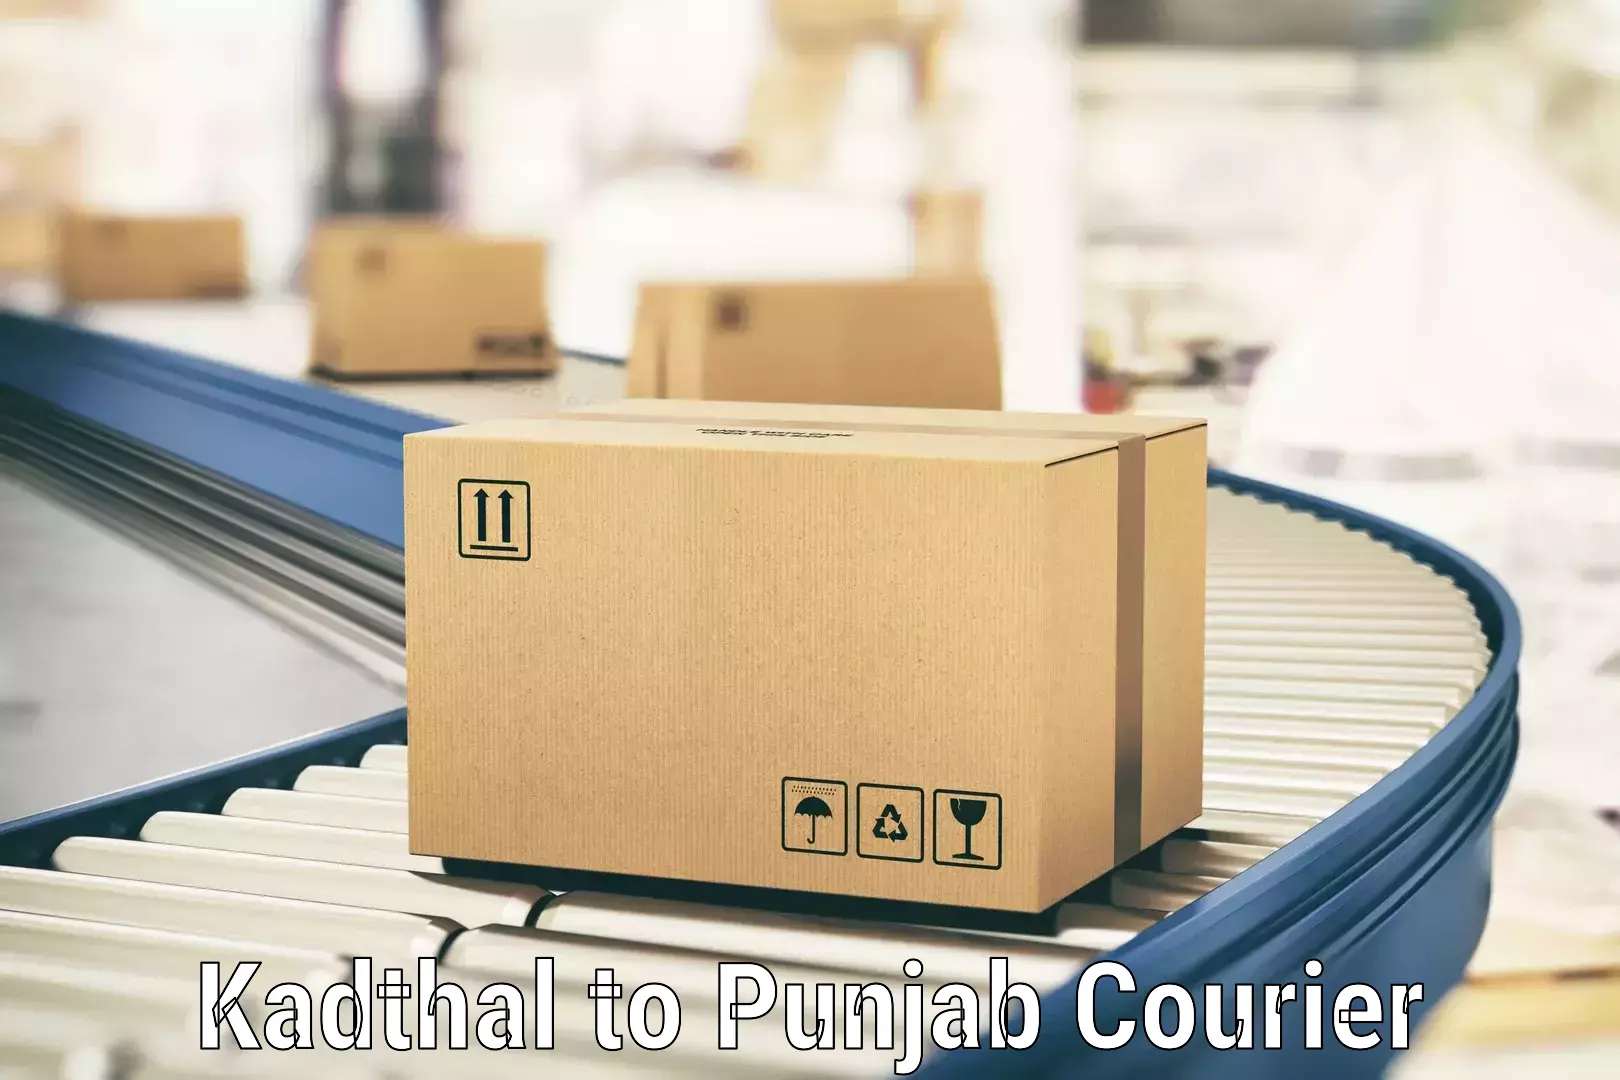 Trackable shipping service Kadthal to Ludhiana